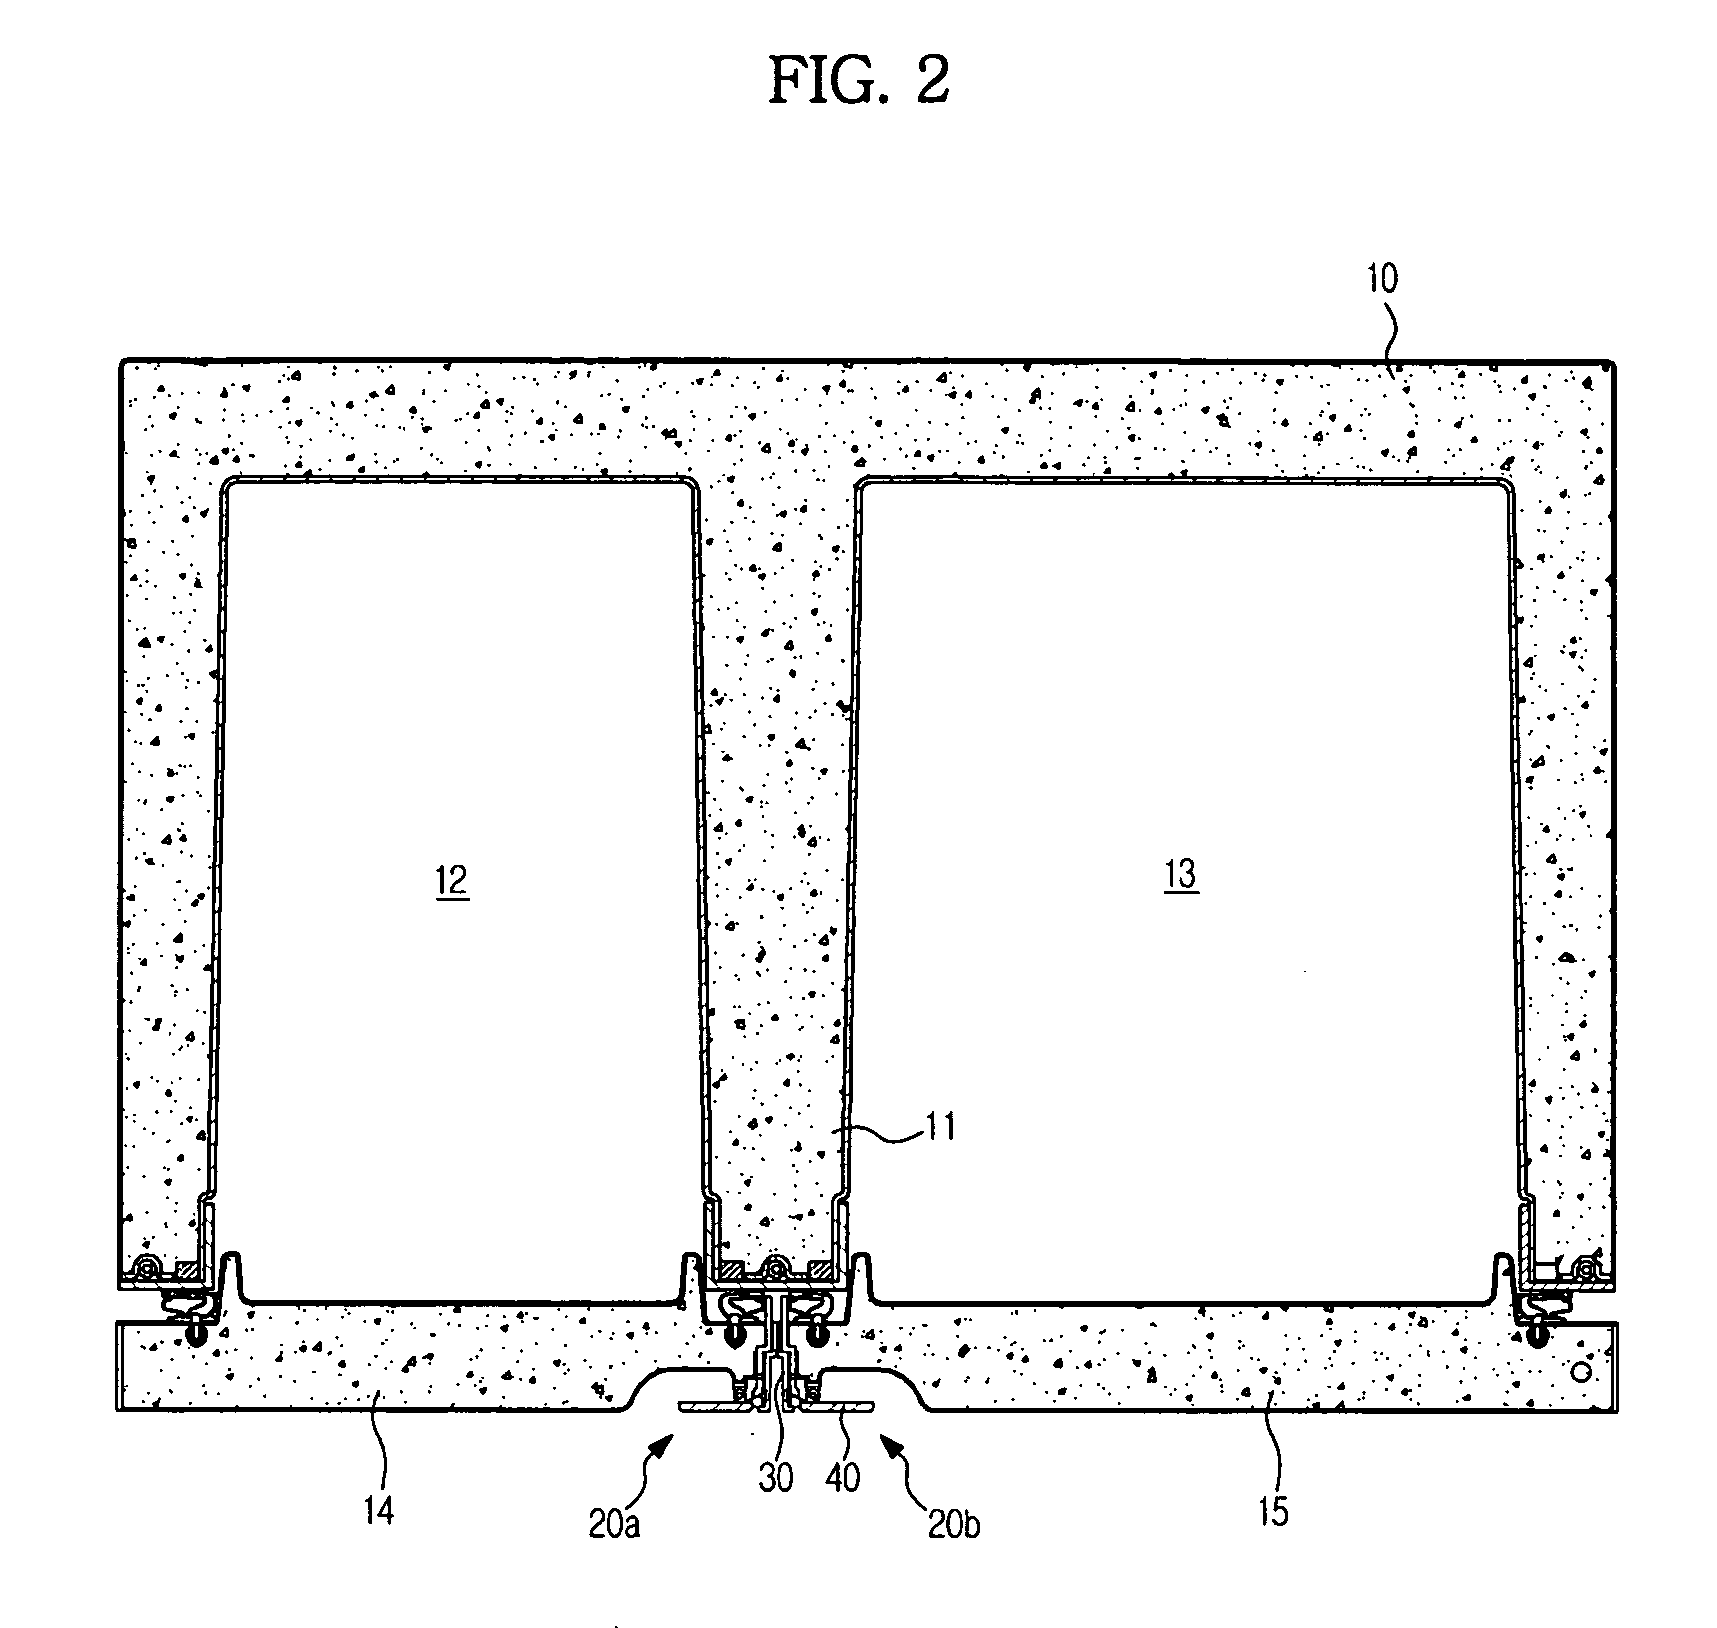 Opening device for refrigerator